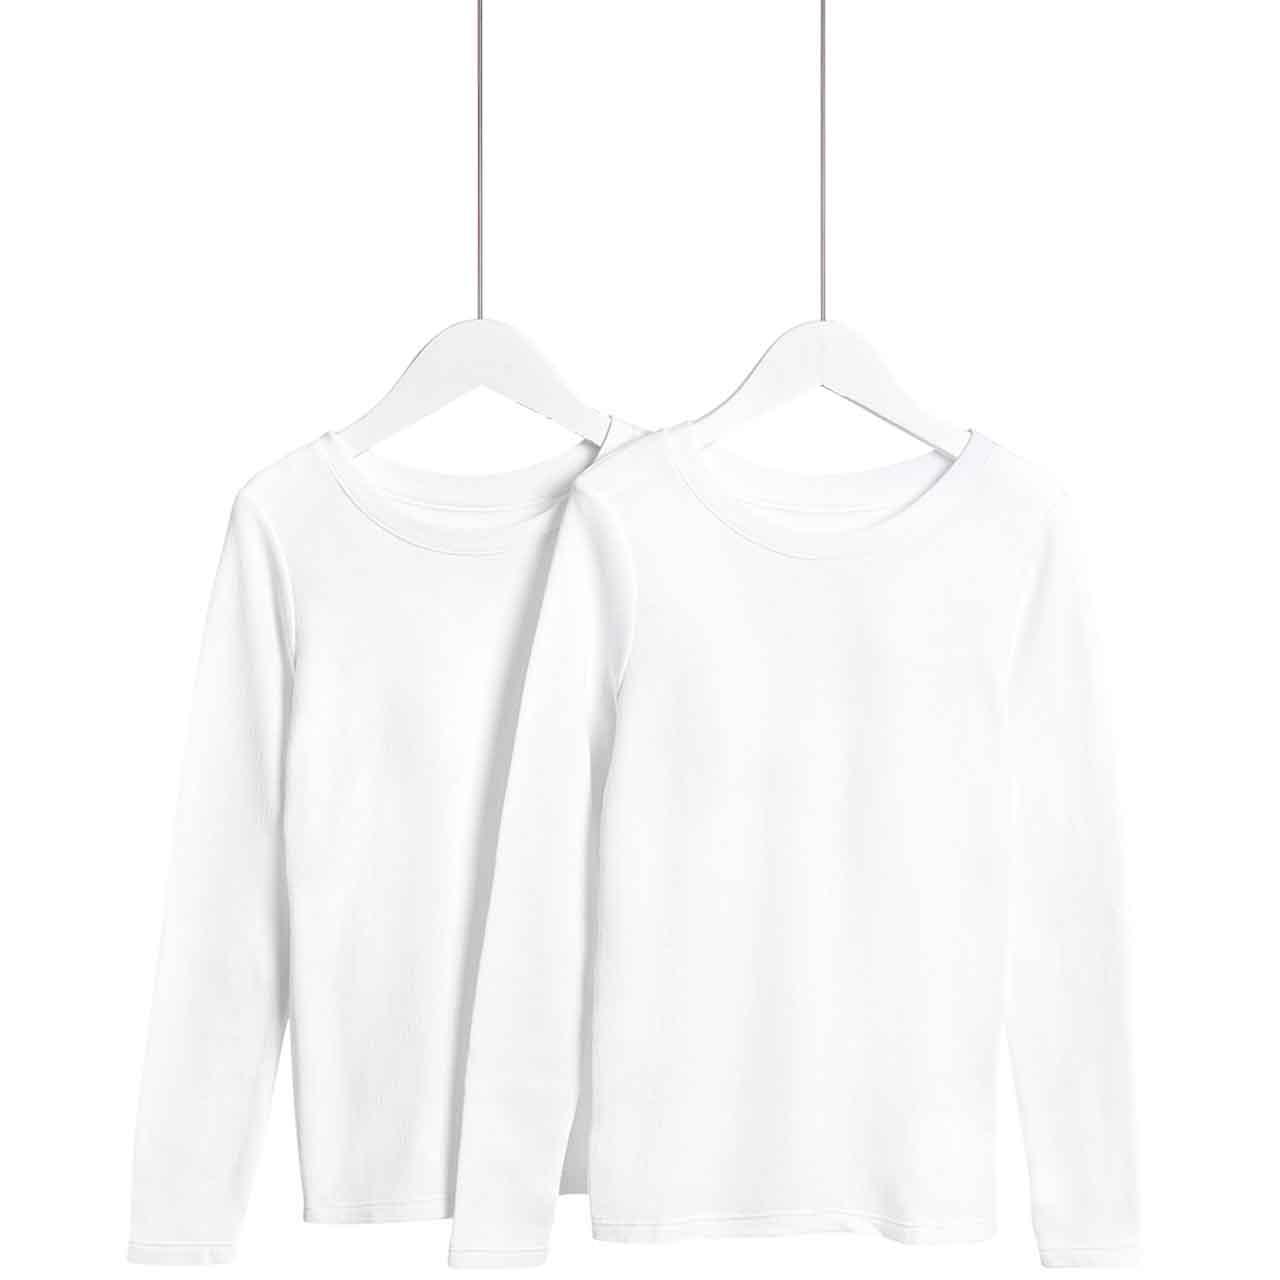 M&S Thermal Top, 7-8 Years, White, 2 Pack 